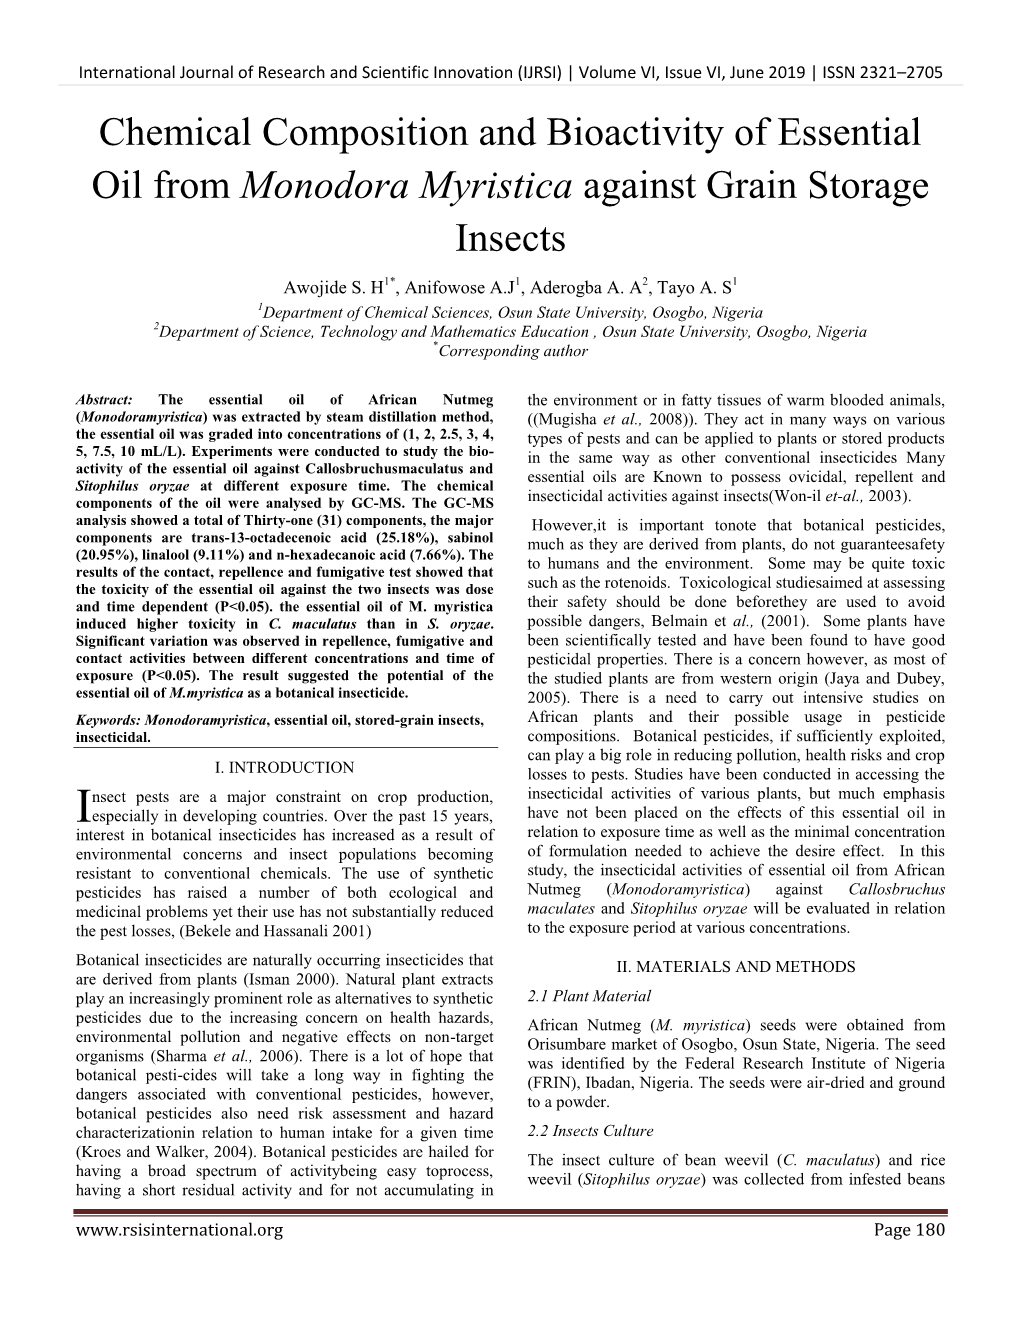 Chemical Composition and Bioactivity of Essential Oil from Monodora Myristica Against Grain Storage Insects